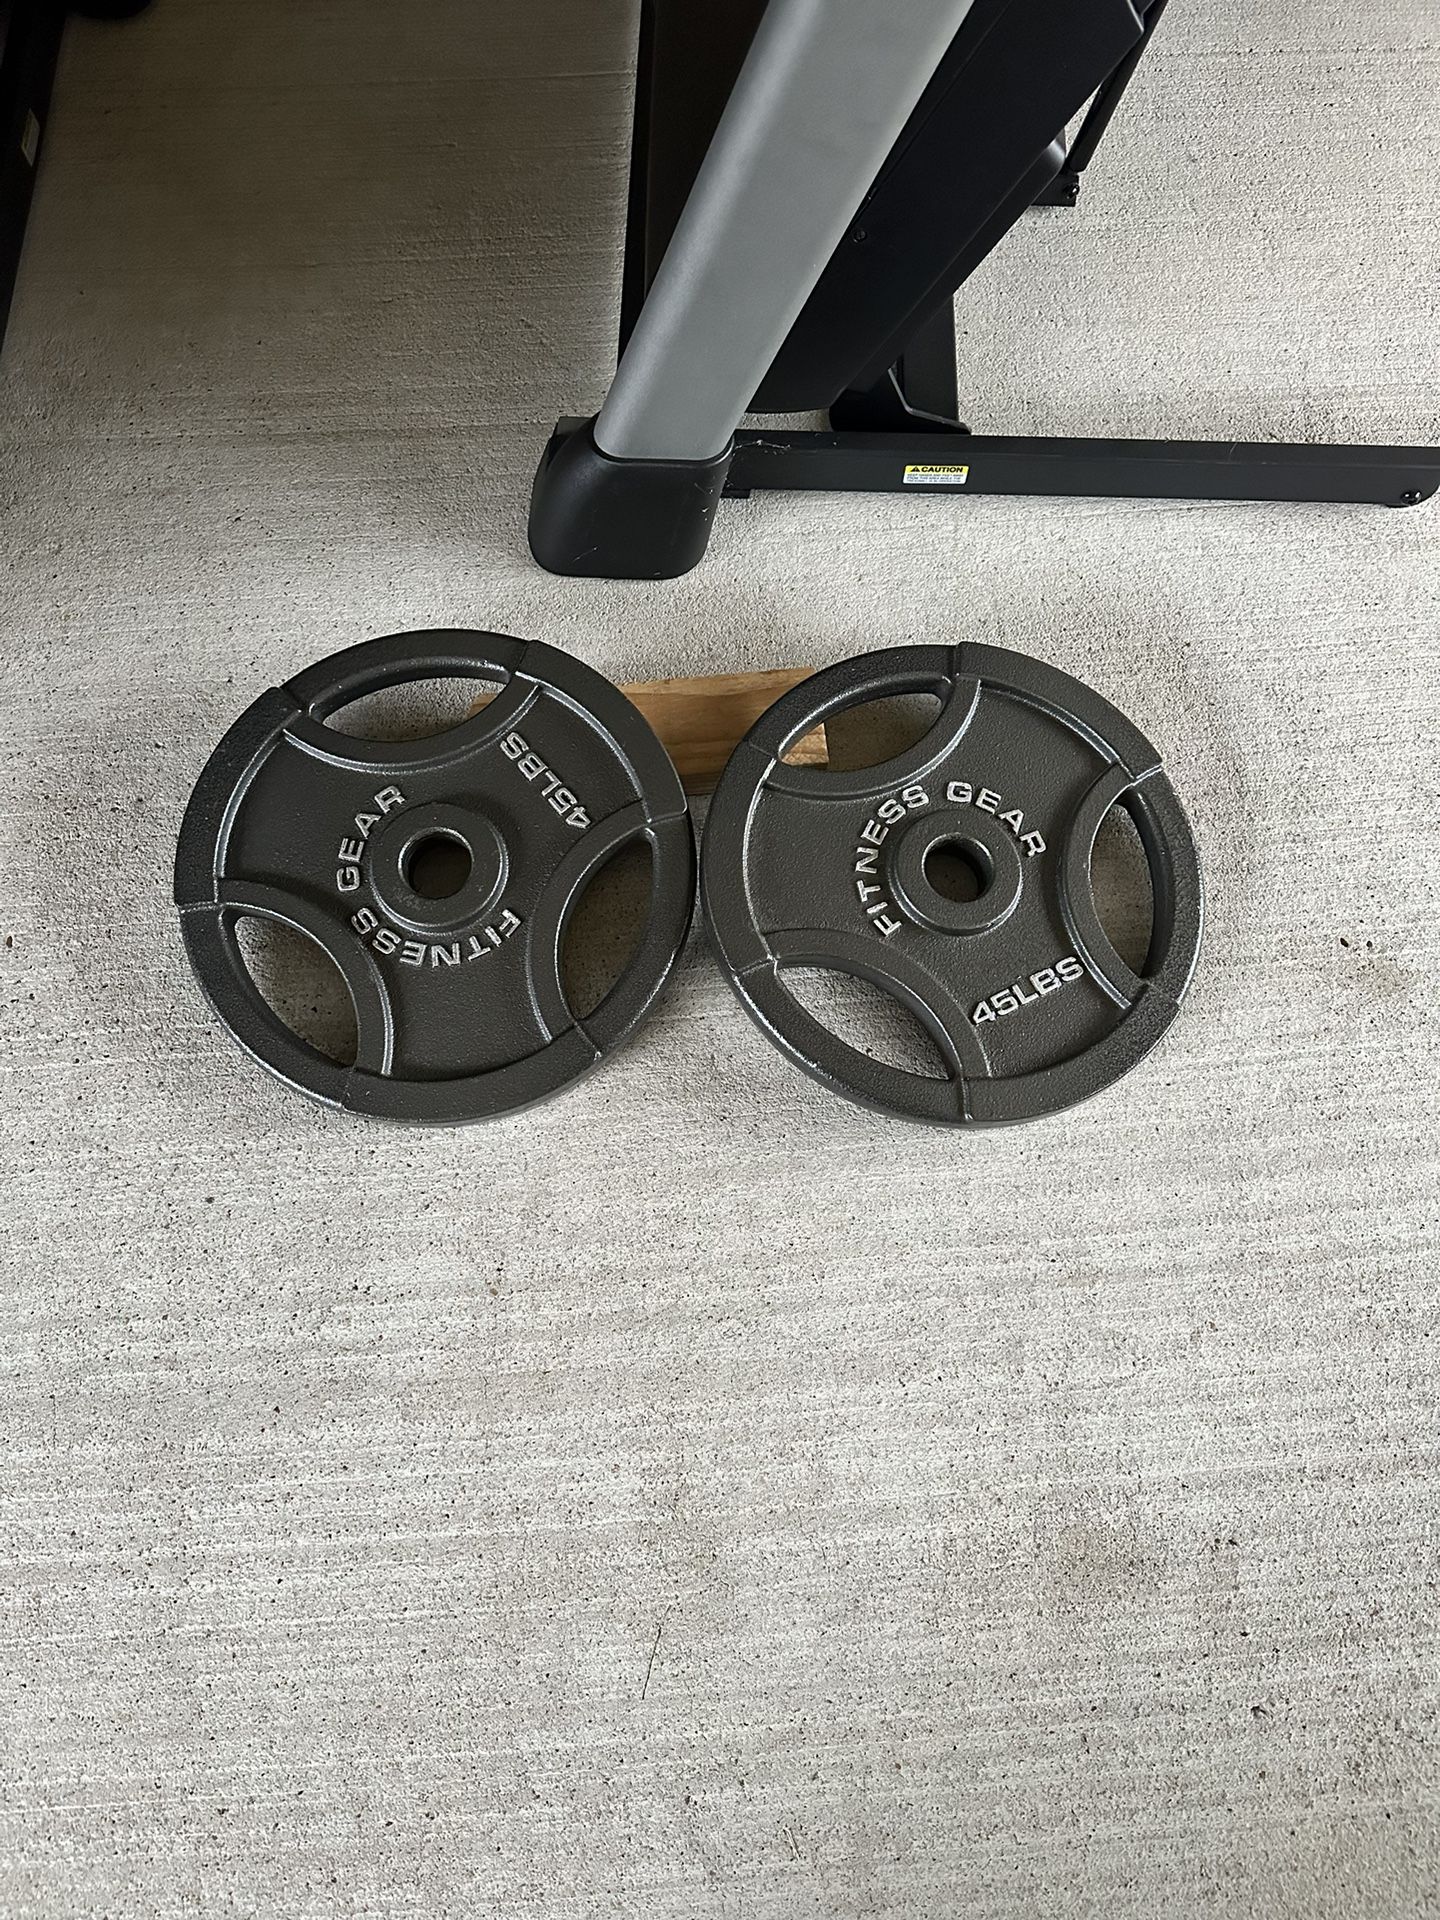 FITNESS GEAR 45Lb Olympic Barbell Grip Weight plates $100  